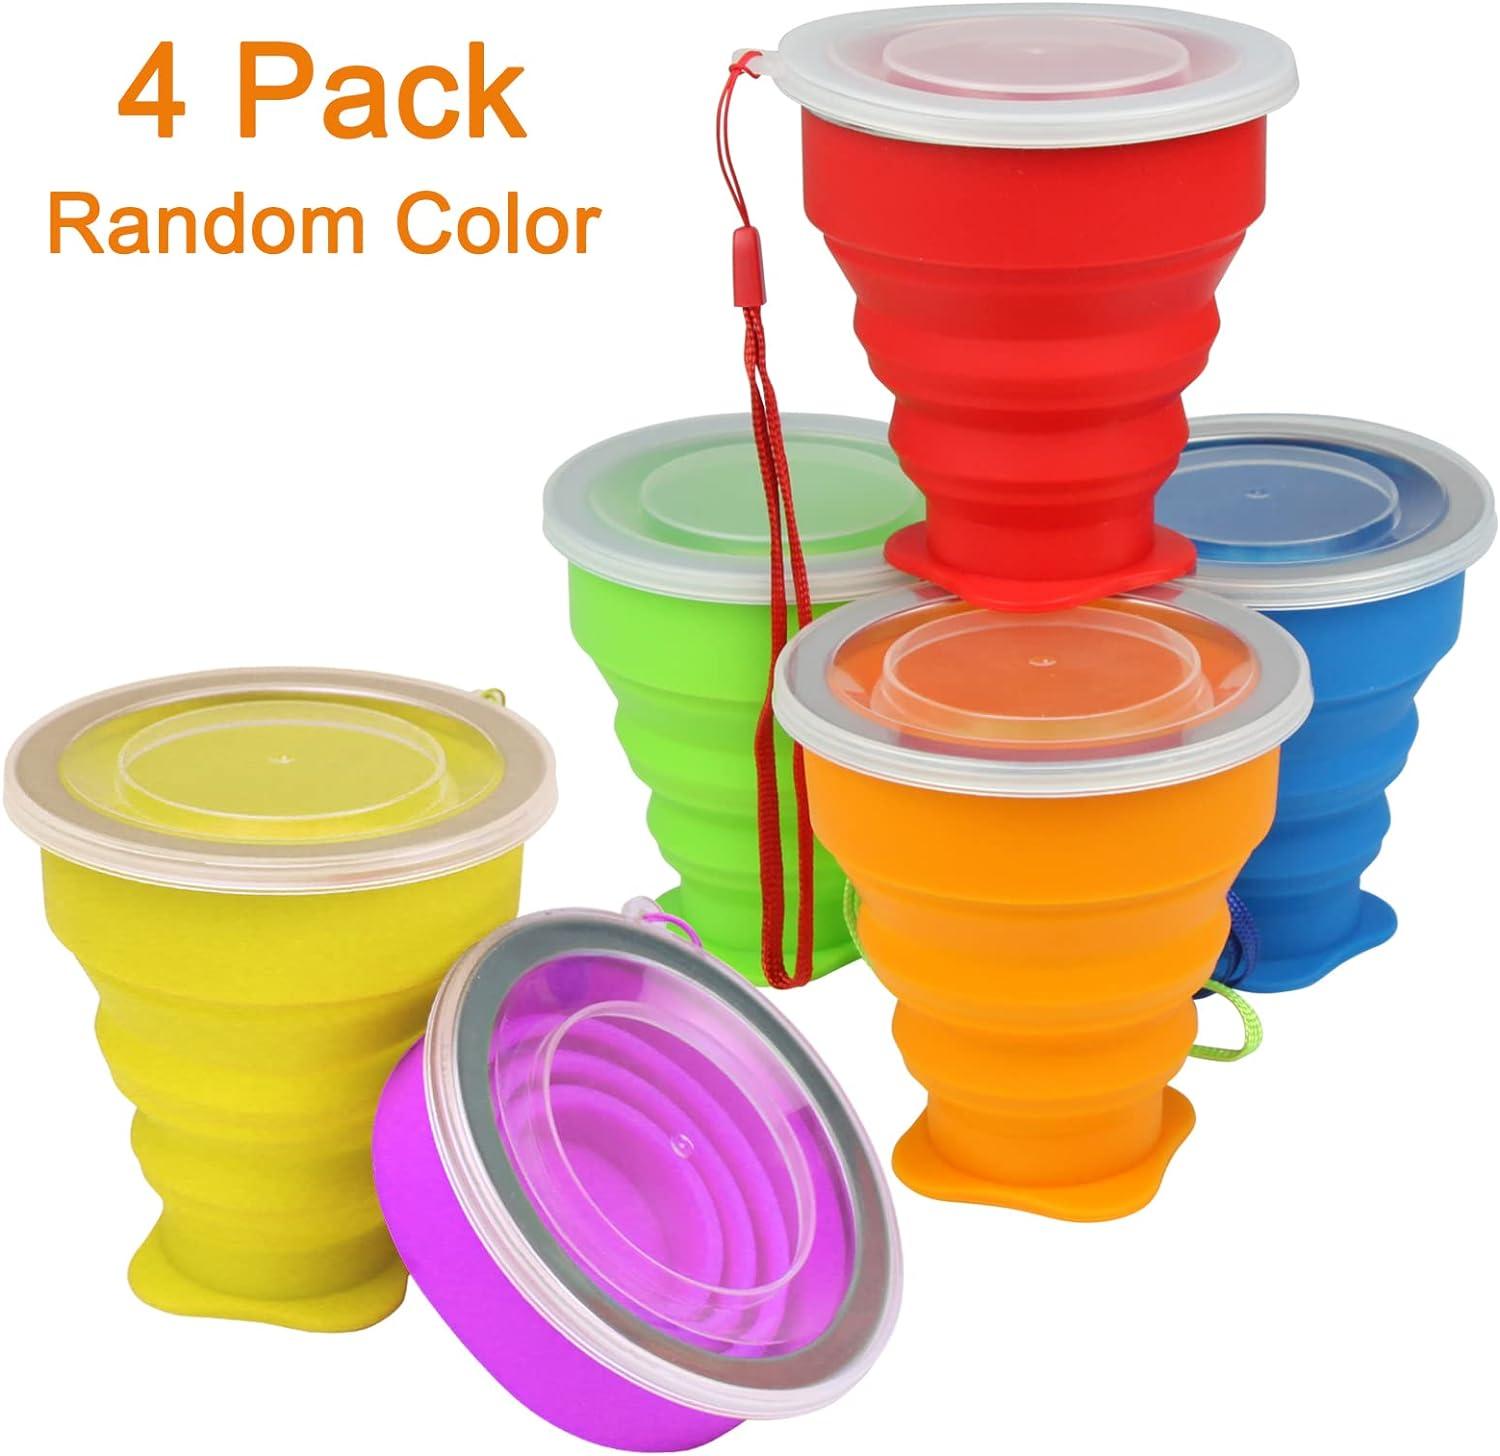 2Pcs Silicone Collapsible Travel Cup - Camping Cups Collapsible Cups  Drinking Cups with Lids for Adu…See more 2Pcs Silicone Collapsible Travel  Cup 